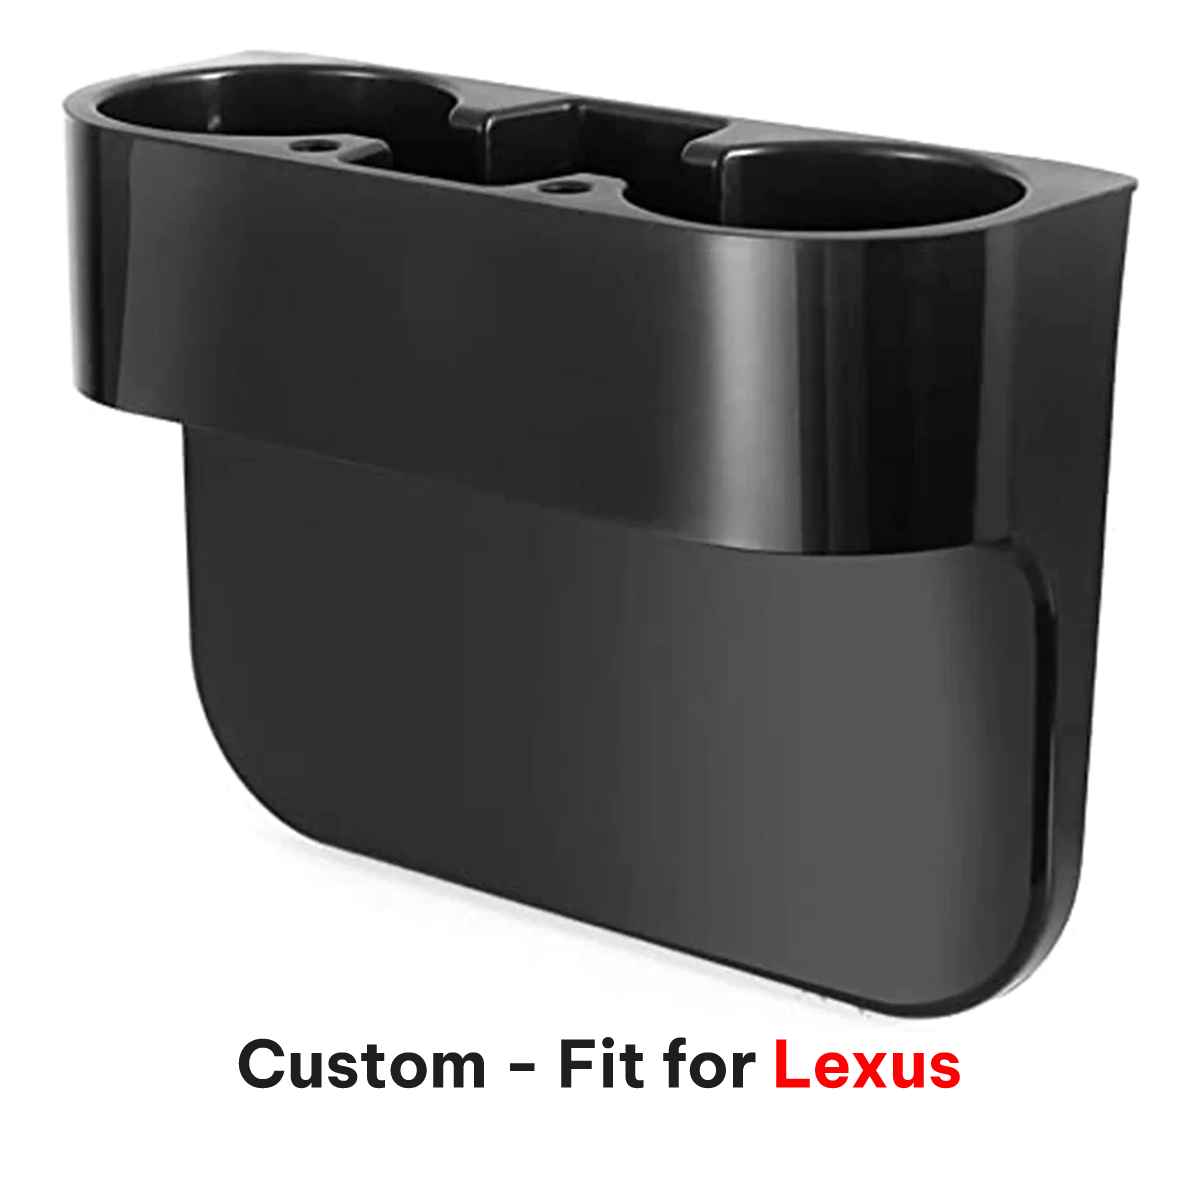 Cup Holder Portable Multifunction Vehicle Seat Cup Cell Phone Drinks Holder Box Car Interior Organizer, Custom-Fit For Car, Car Accessories DLFJ231